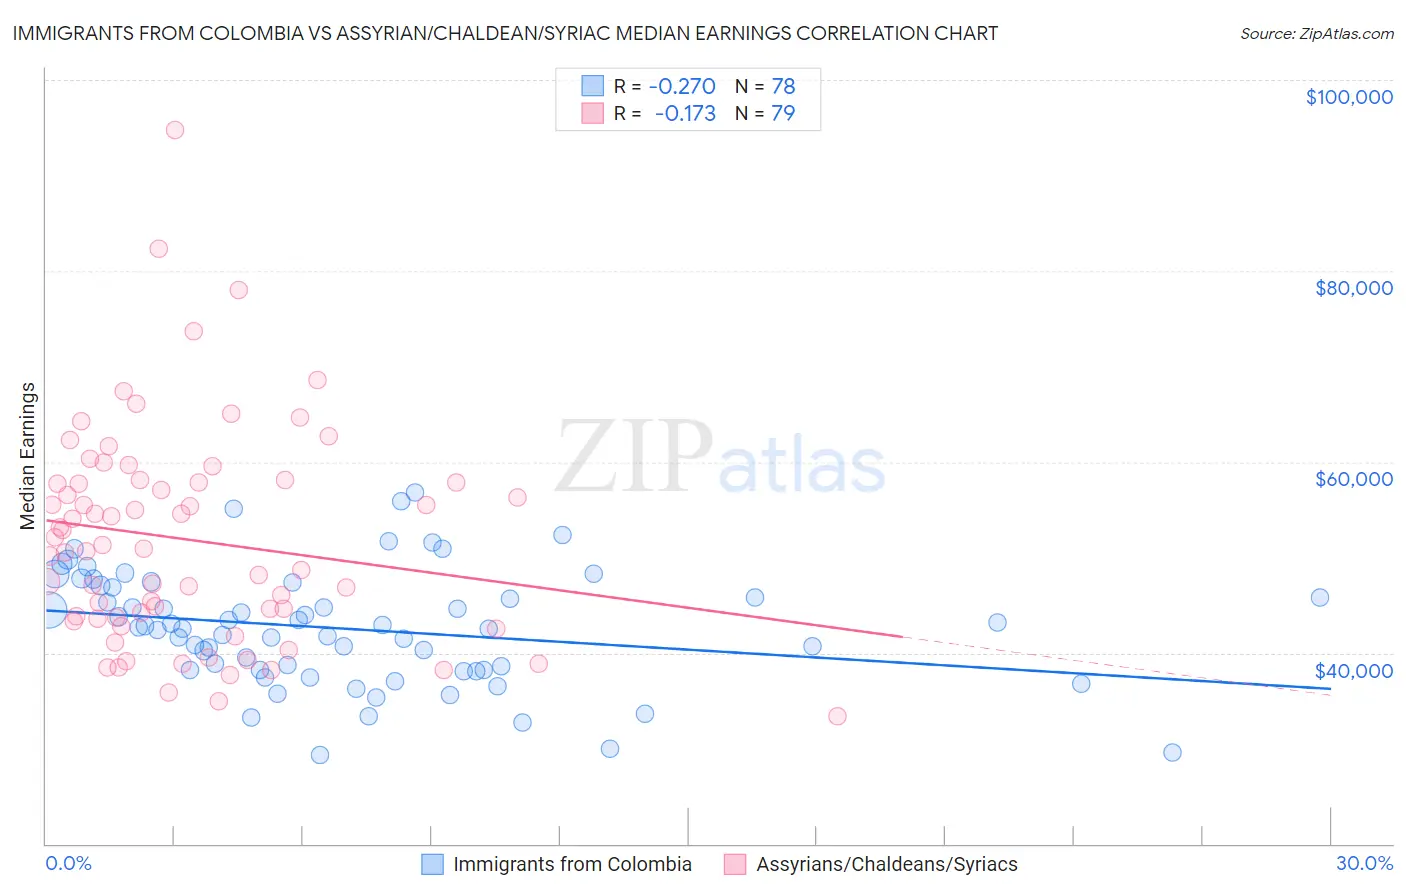 Immigrants from Colombia vs Assyrian/Chaldean/Syriac Median Earnings